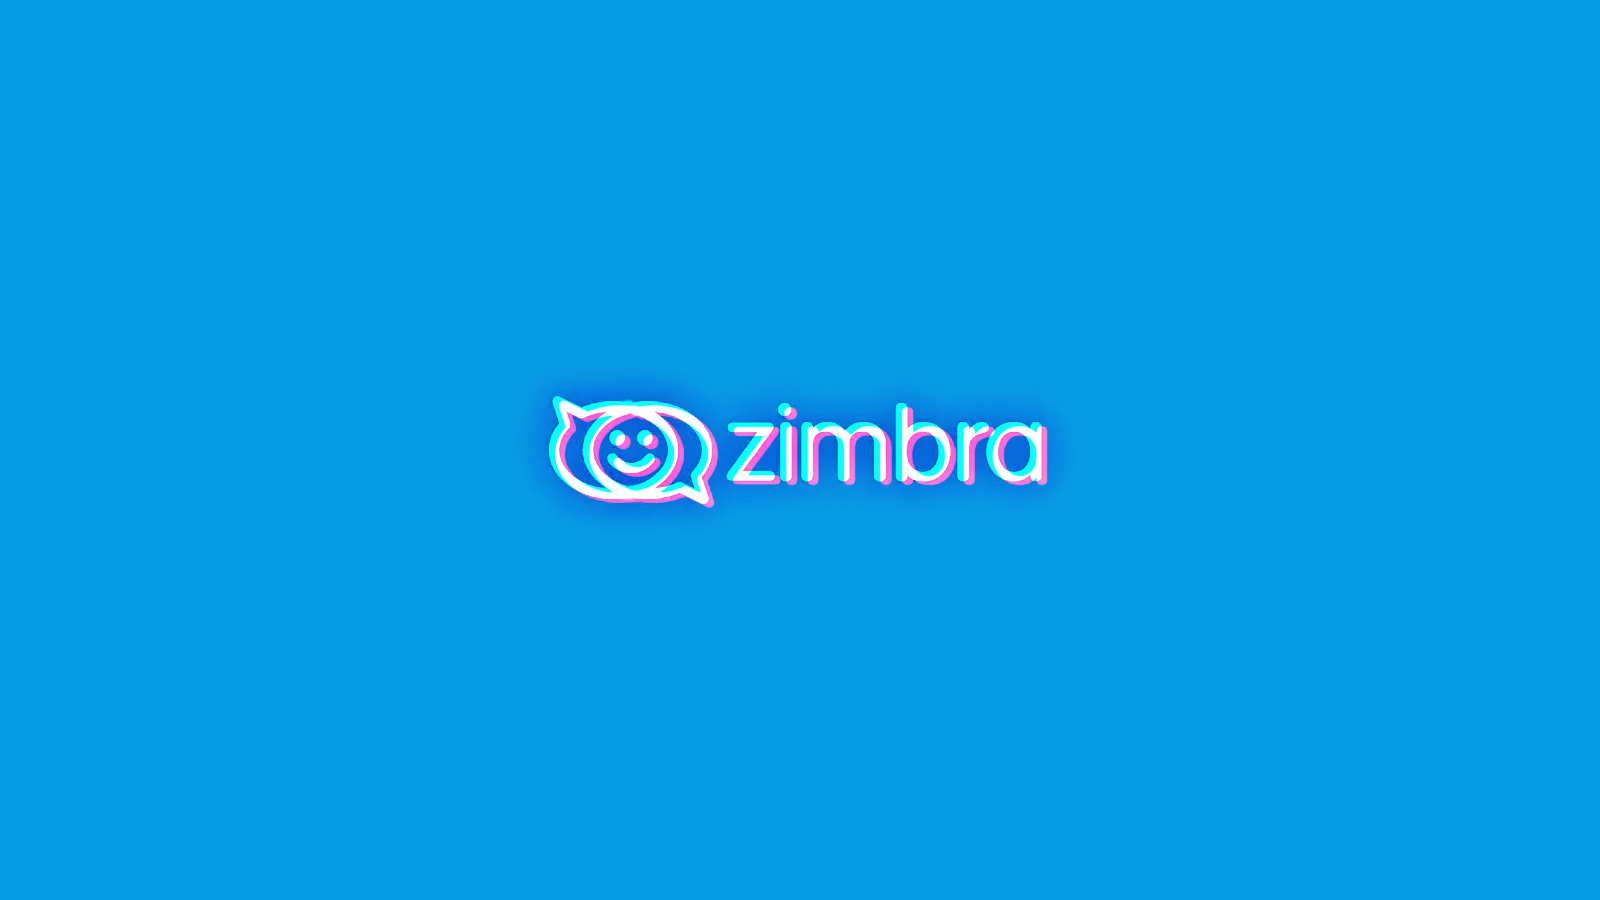 Zimbra auth bypass bug exploited to breach over 1,000 servers